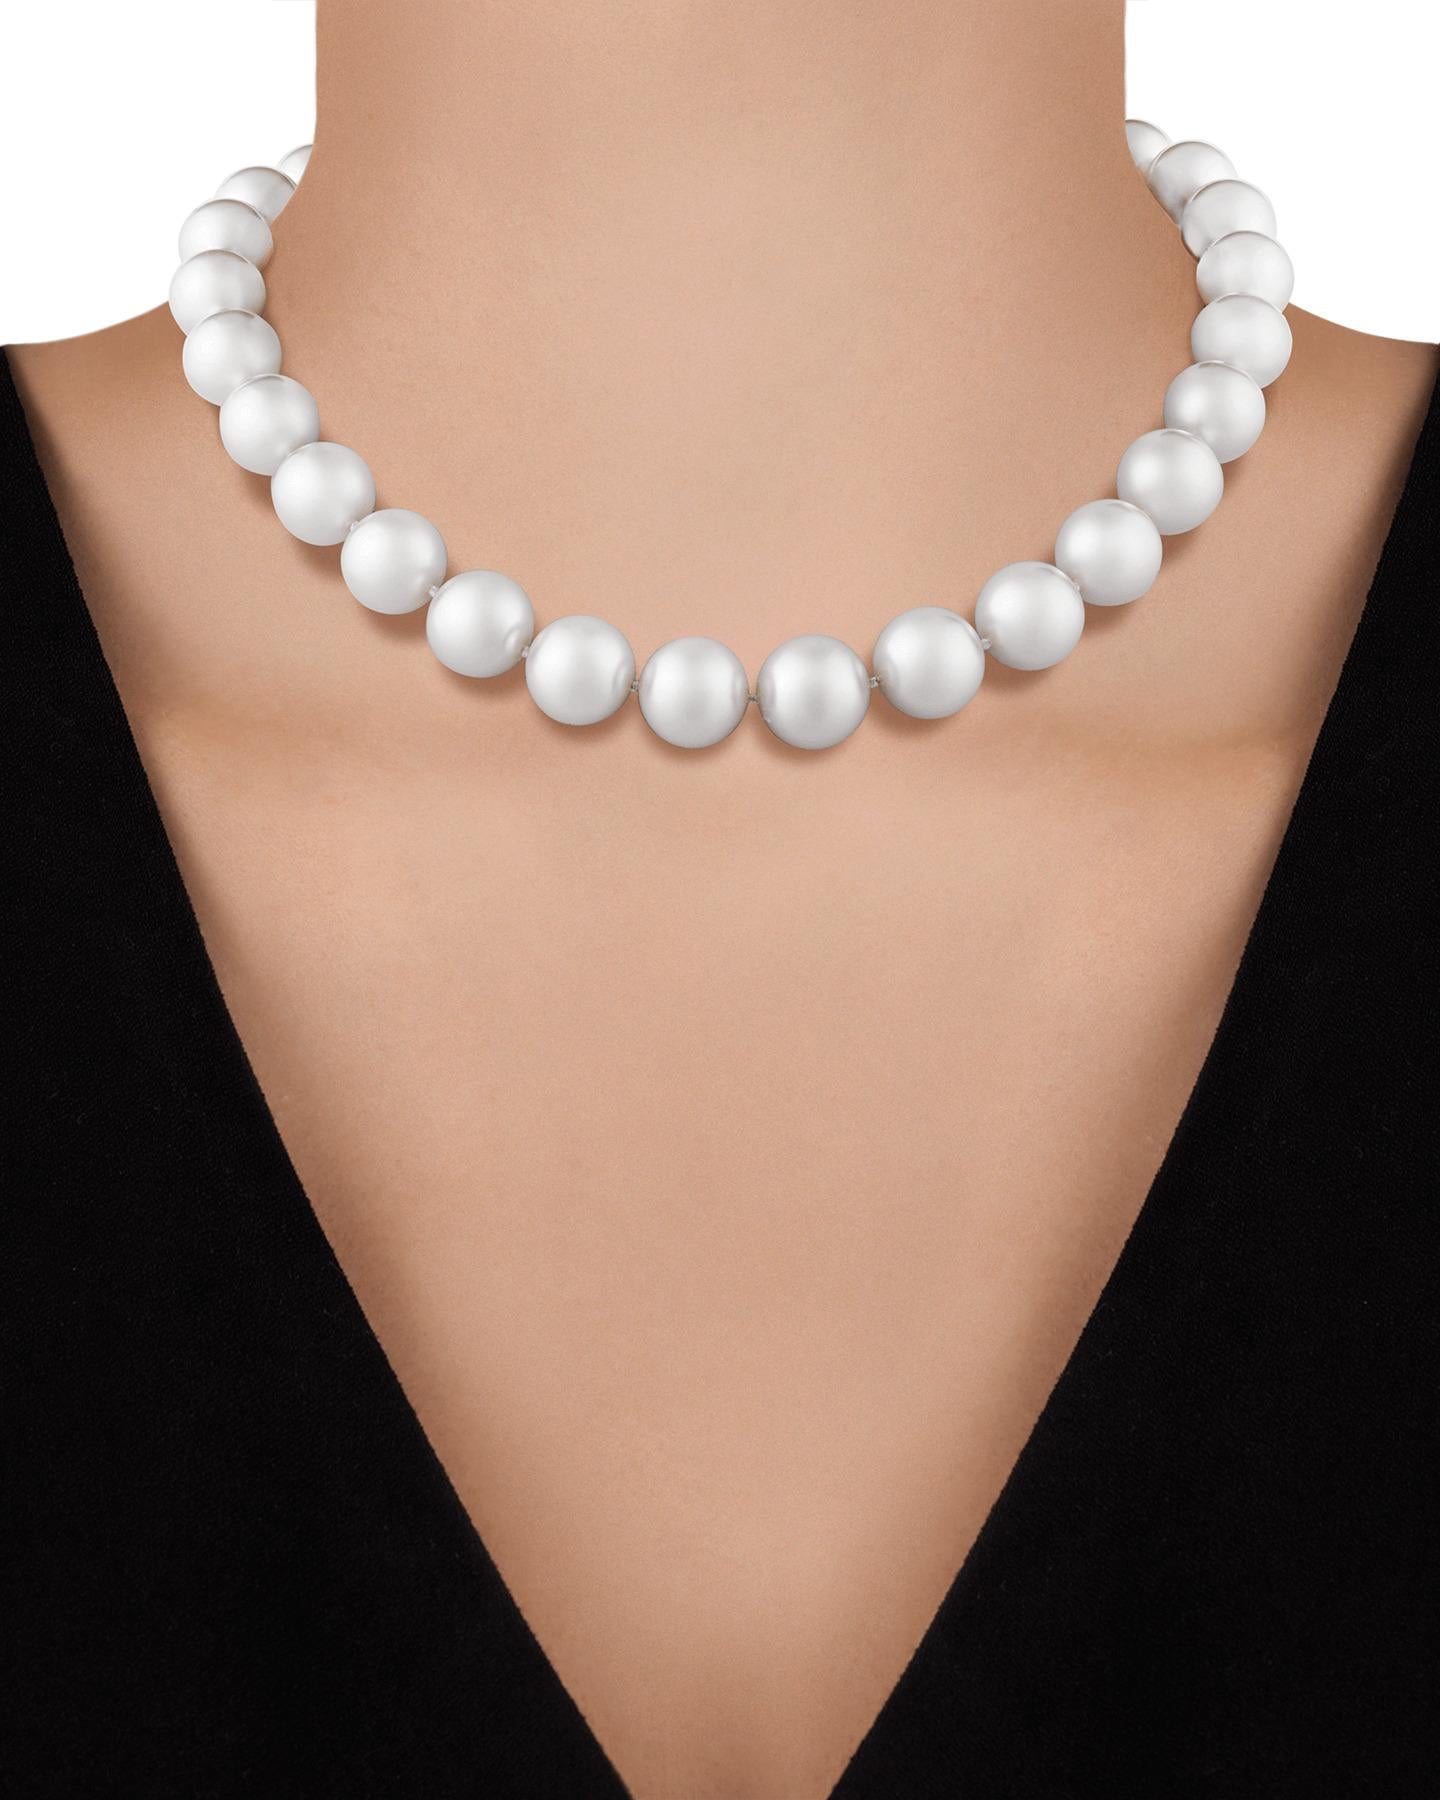 Twenty-nine lustrous South Sea pearls comprise this classic necklace. Measuring 13mm to 15mm, the pearls are perfectly matched in size and color. South Sea pearls are among the rarest and most desirable pearls in existence and are highly prized for